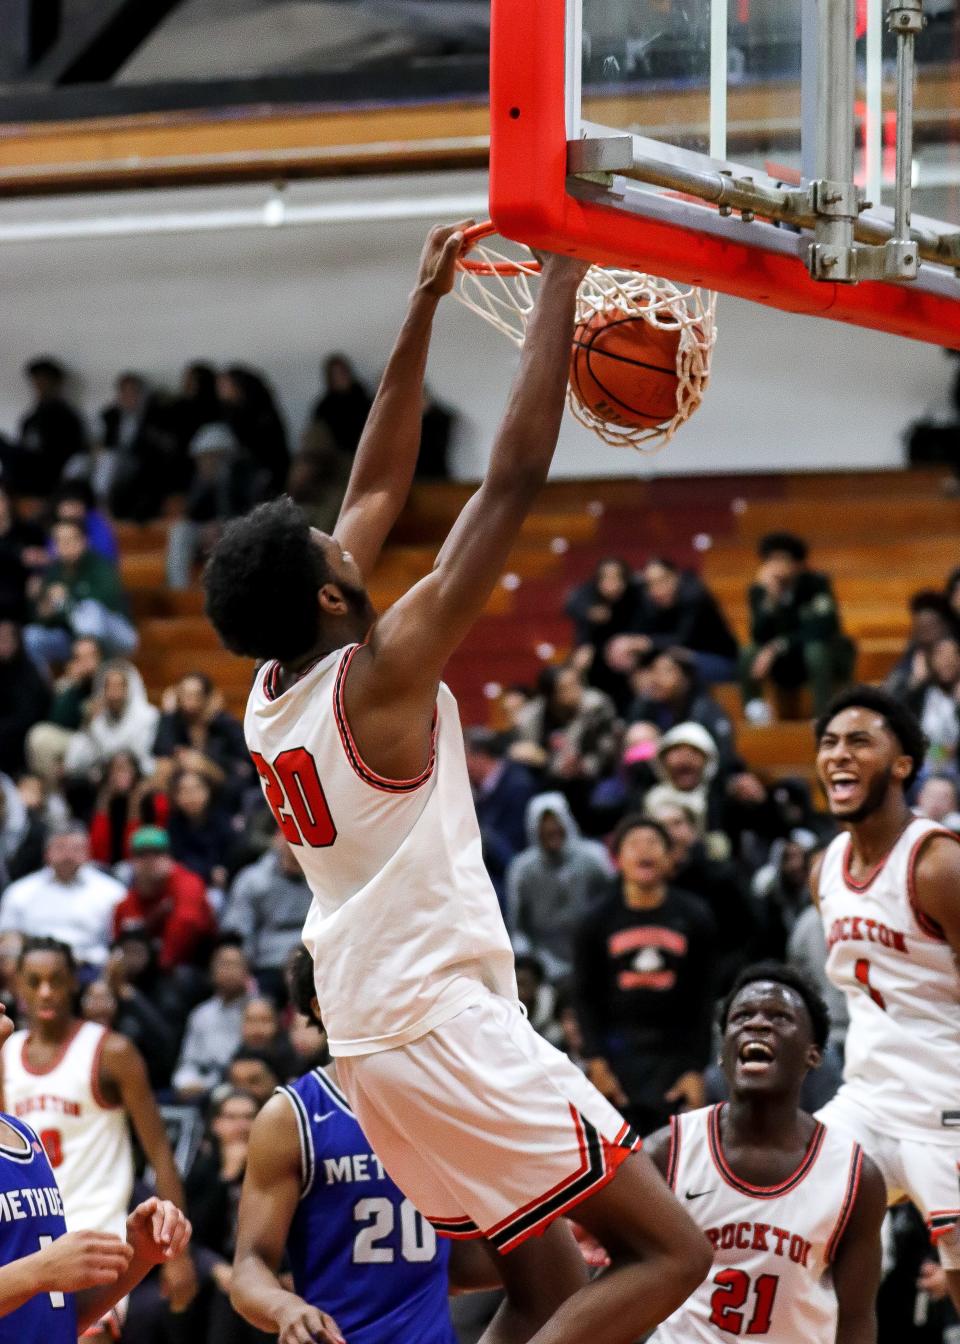 Brockton's Chidi Nwosu dunks the ball as teammates John Francois (No. 21) and Cam Monteiro, far right, celebrate during a game against Methuen in the Round of 32 of the Div. 1 state tournament on Thursday, March 2, 2023.